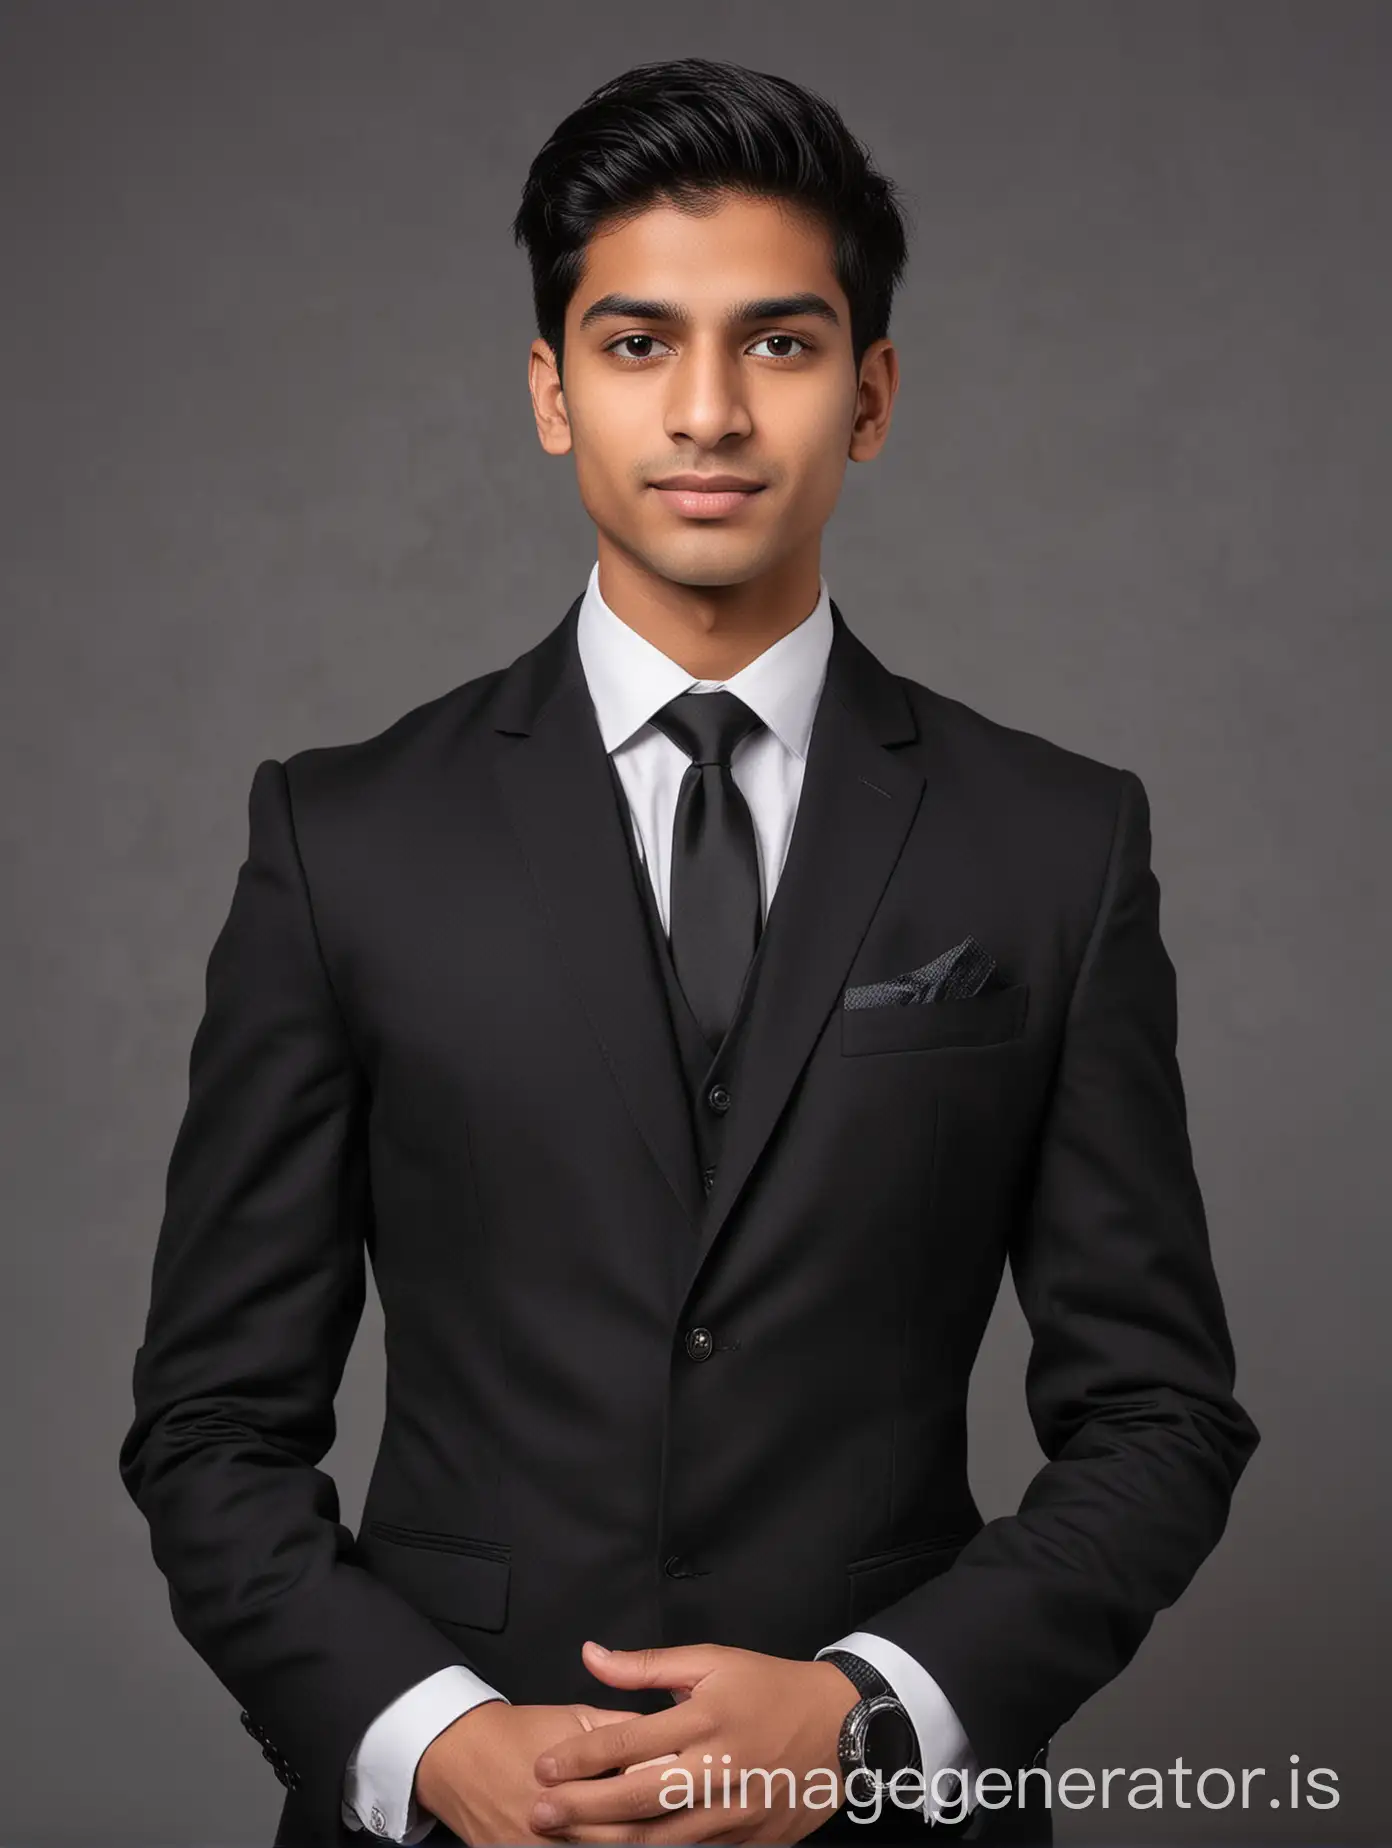 Professional-LinkedIn-Photo-of-a-Young-Indian-Man-in-a-Bespoke-Black-Suit